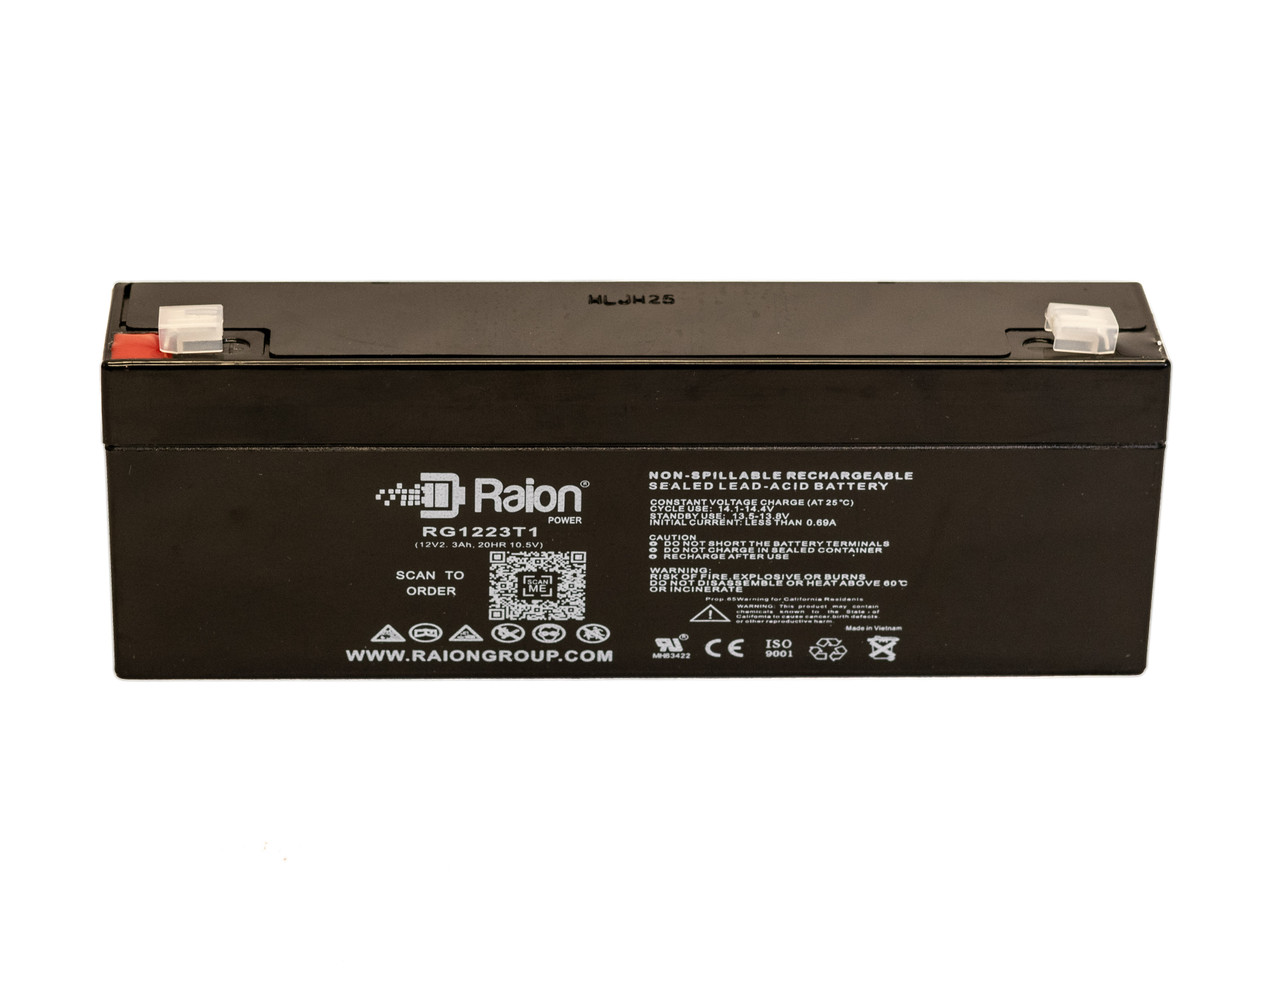 Raion Power 12V 2.3Ah SLA Battery With T1 Terminals For Ivac Medical Systems 500 Keofeed Infusion Pump